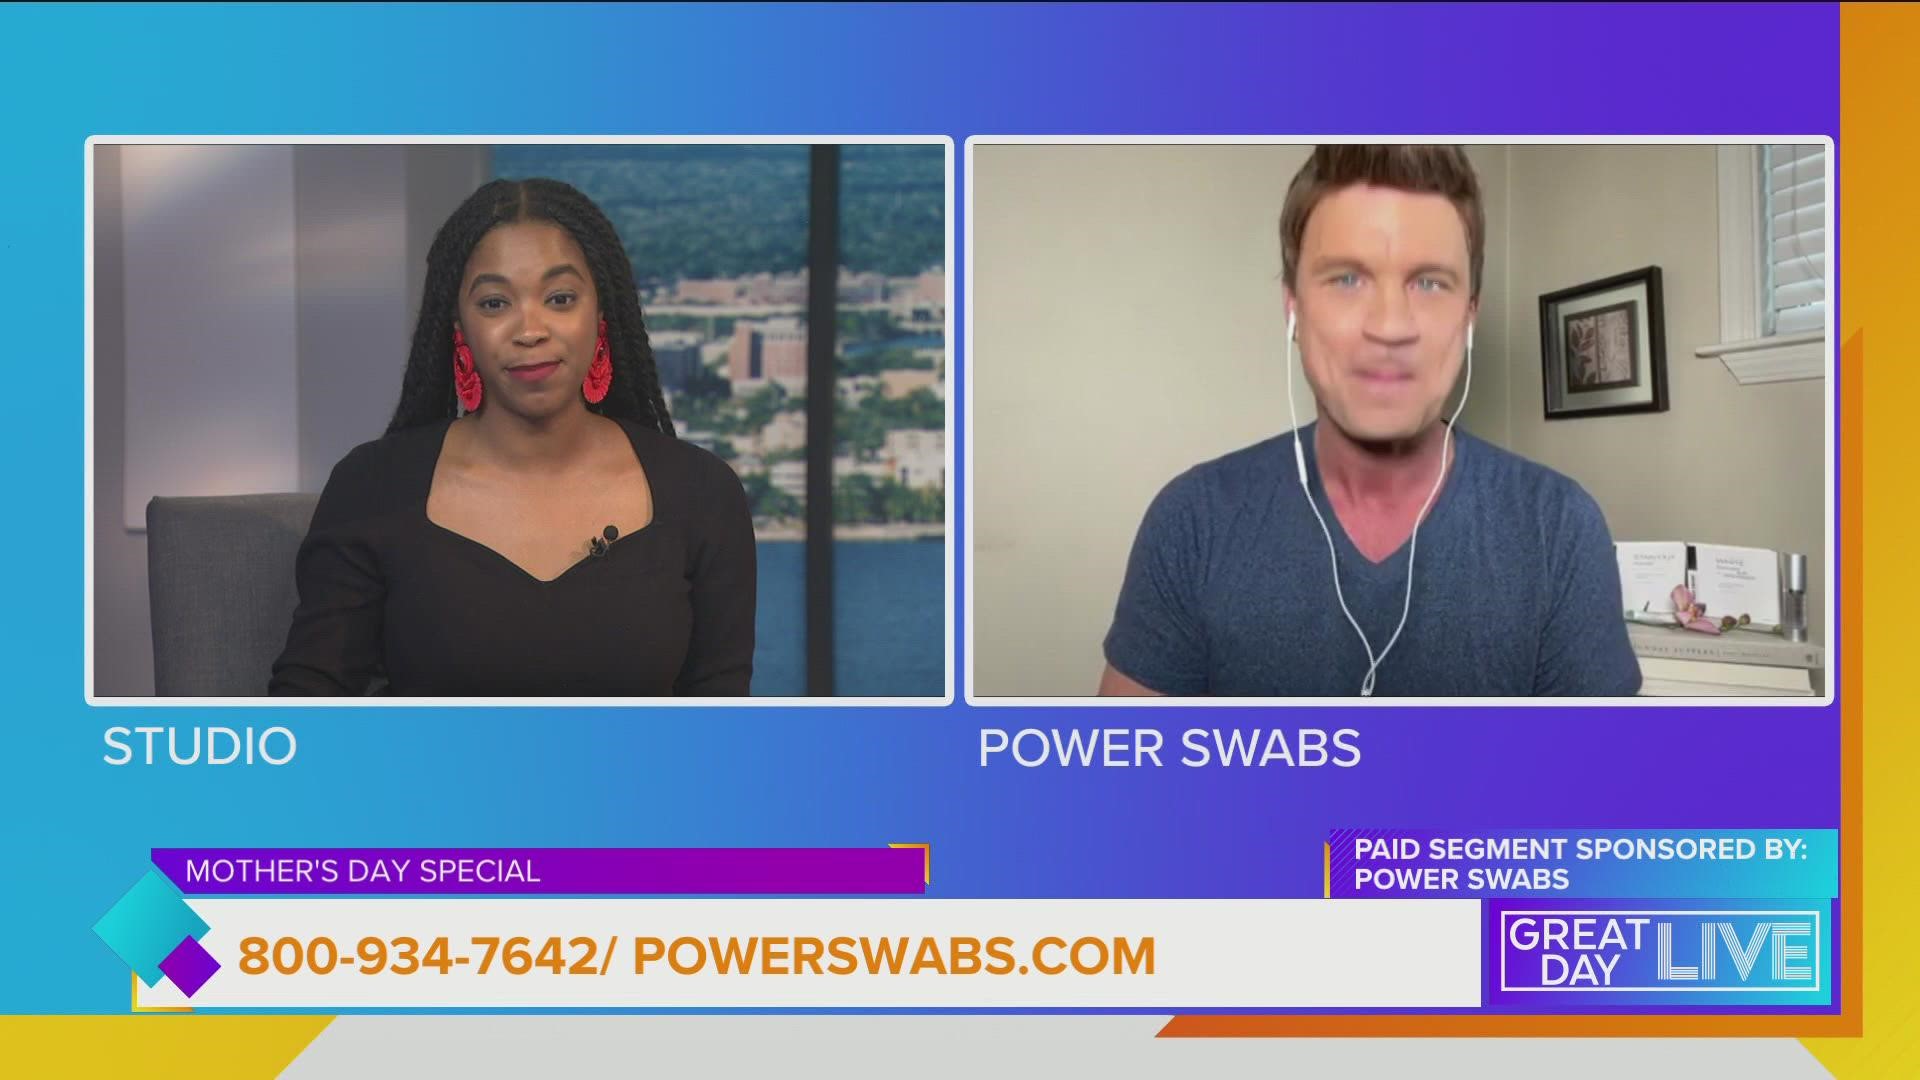 Paid segment sponsored by Power Swabs.